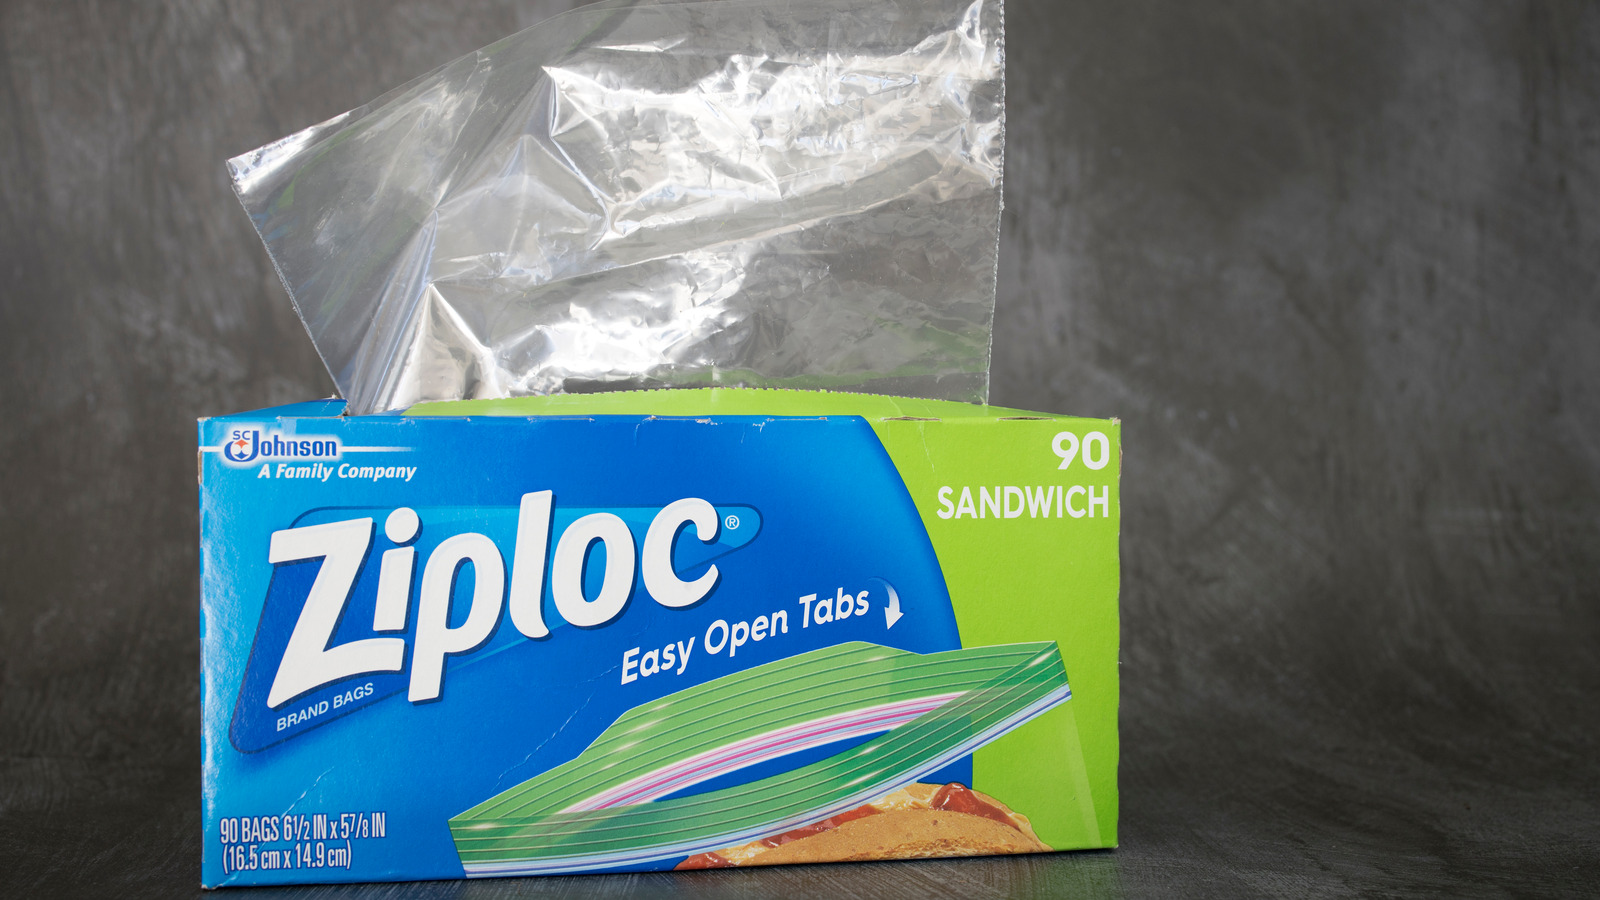 https://www.mashed.com/img/gallery/can-you-use-ziploc-bags-to-sous-vide/l-intro-1624818790.jpg